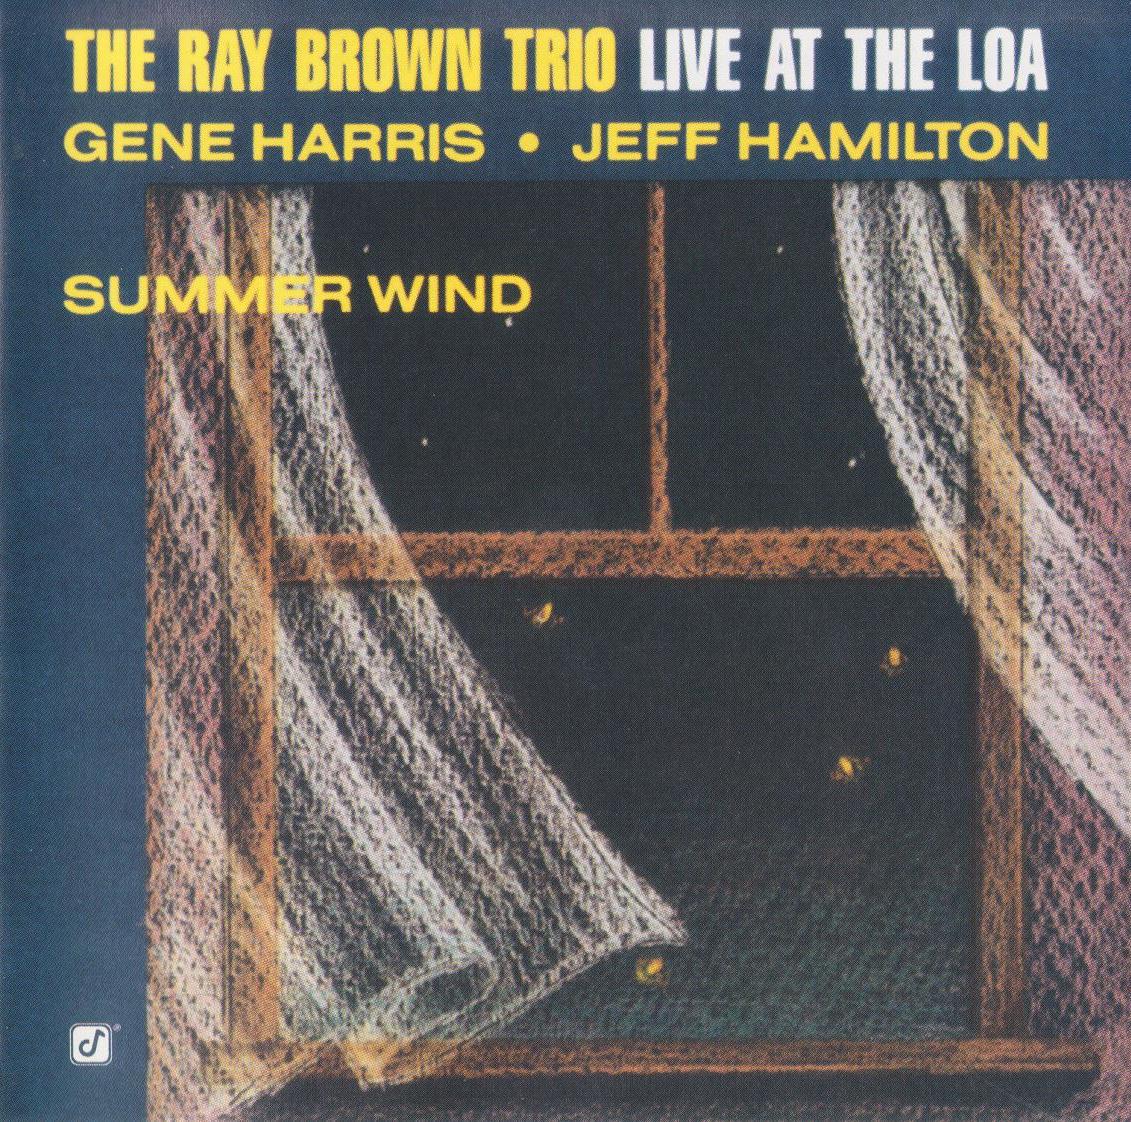 Ray Brown Trio – Summer Wind Live at The Loa (2003) MCH SACD ISO + Hi-Res FLAC